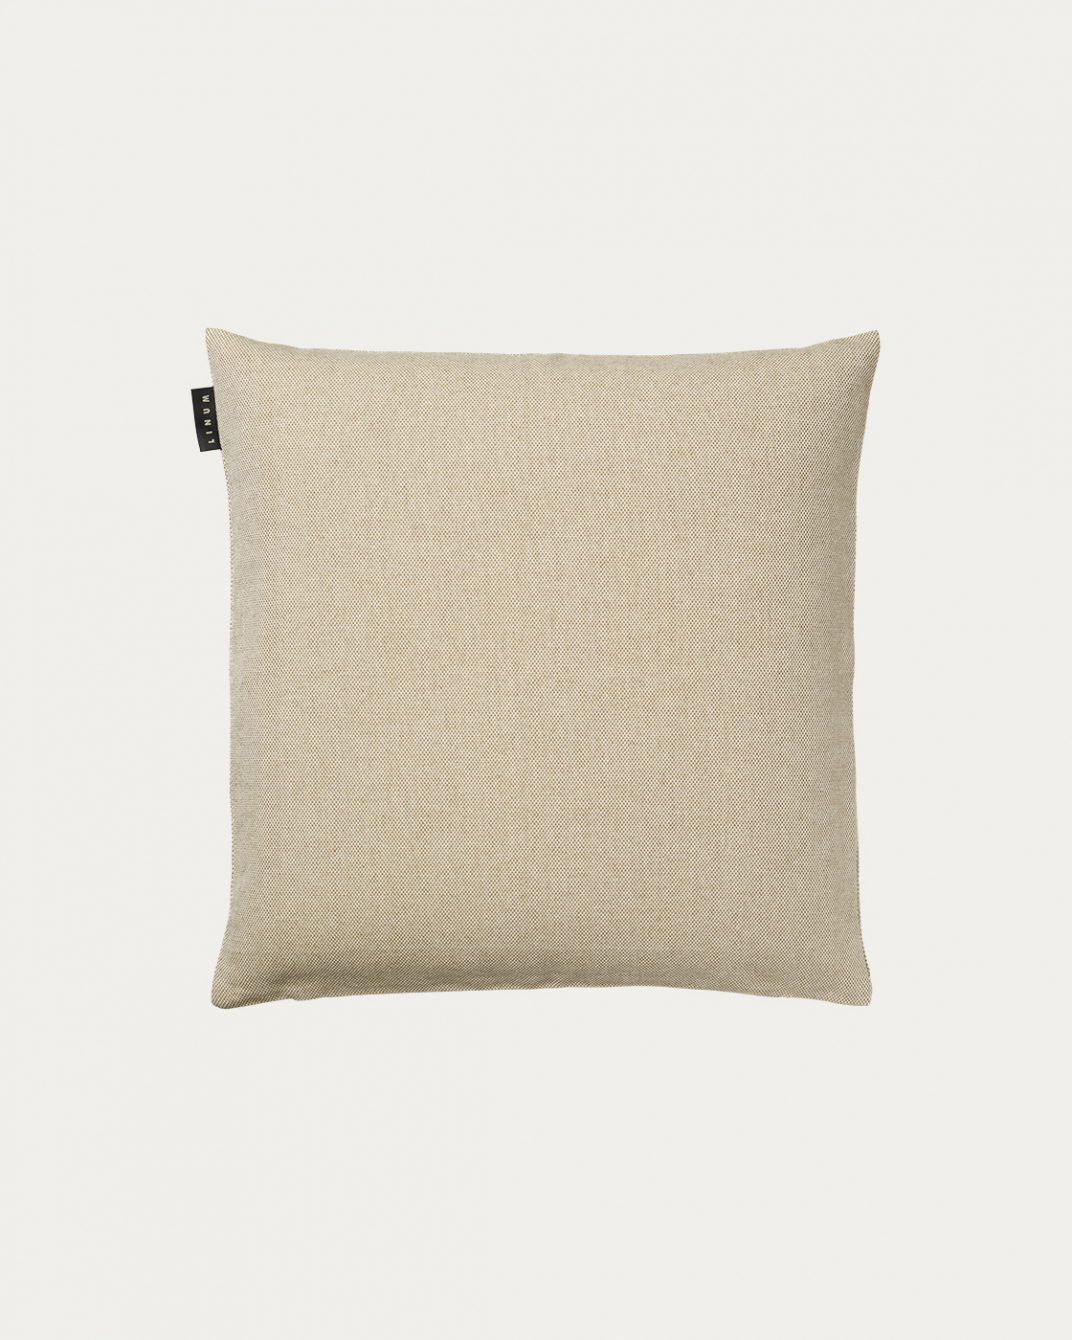 Product image bronze brown PEPPER cushion cover made of soft cotton from LINUM DESIGN. Easy to wash and durable for generations. Size 40x40 cm.